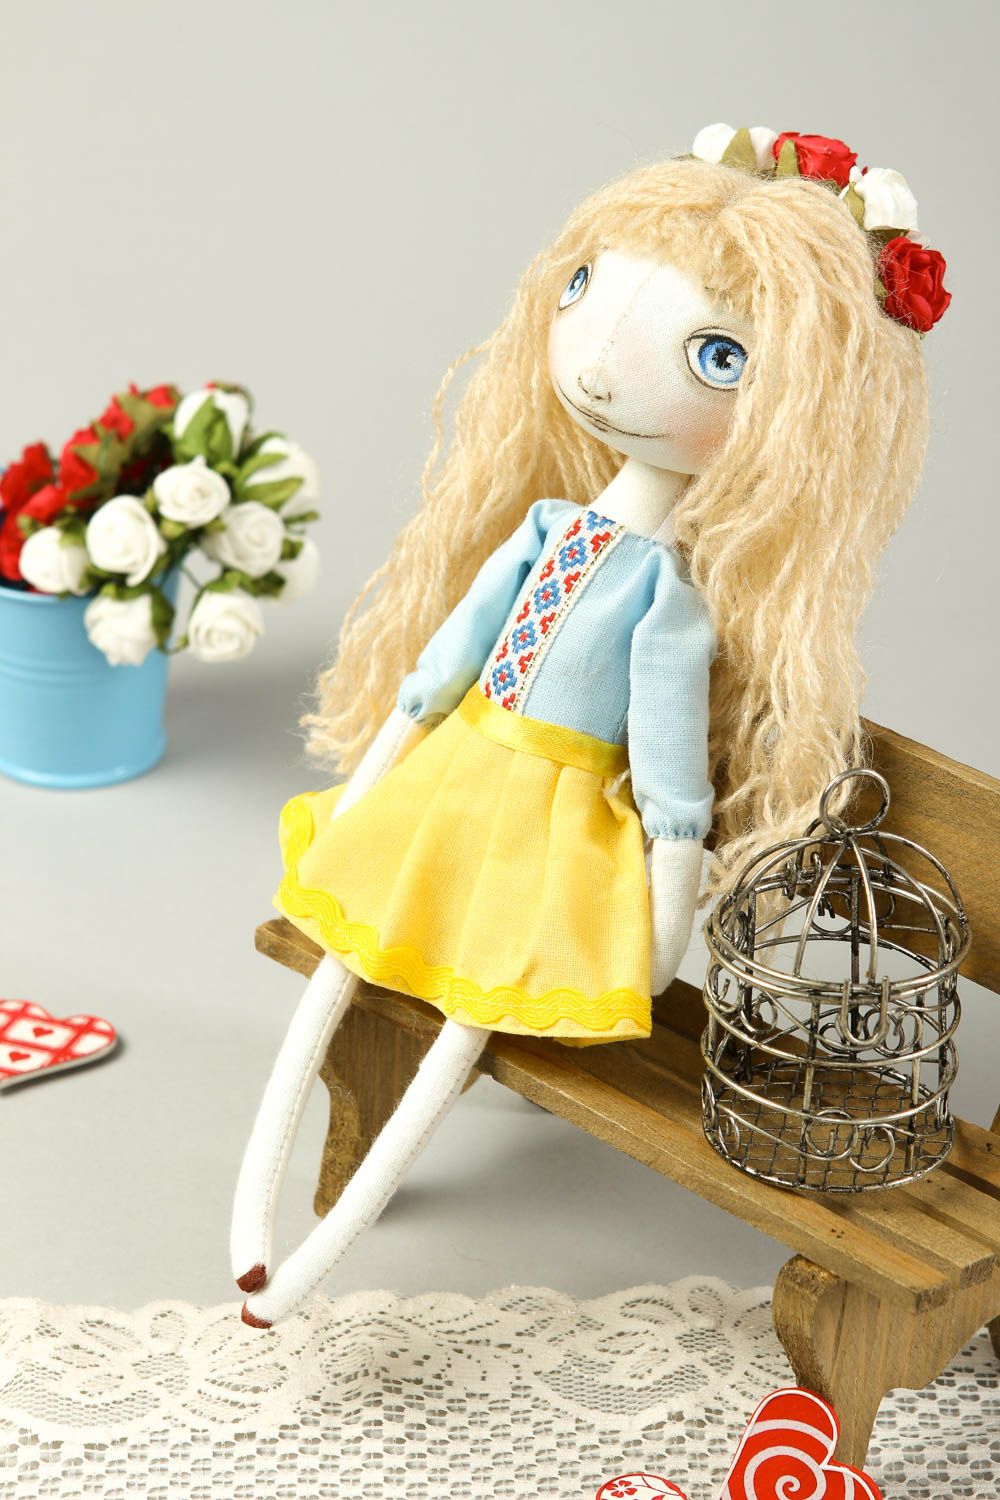 Homemade toys soft doll girl doll home decor handmade gifts childrens toys photo 1